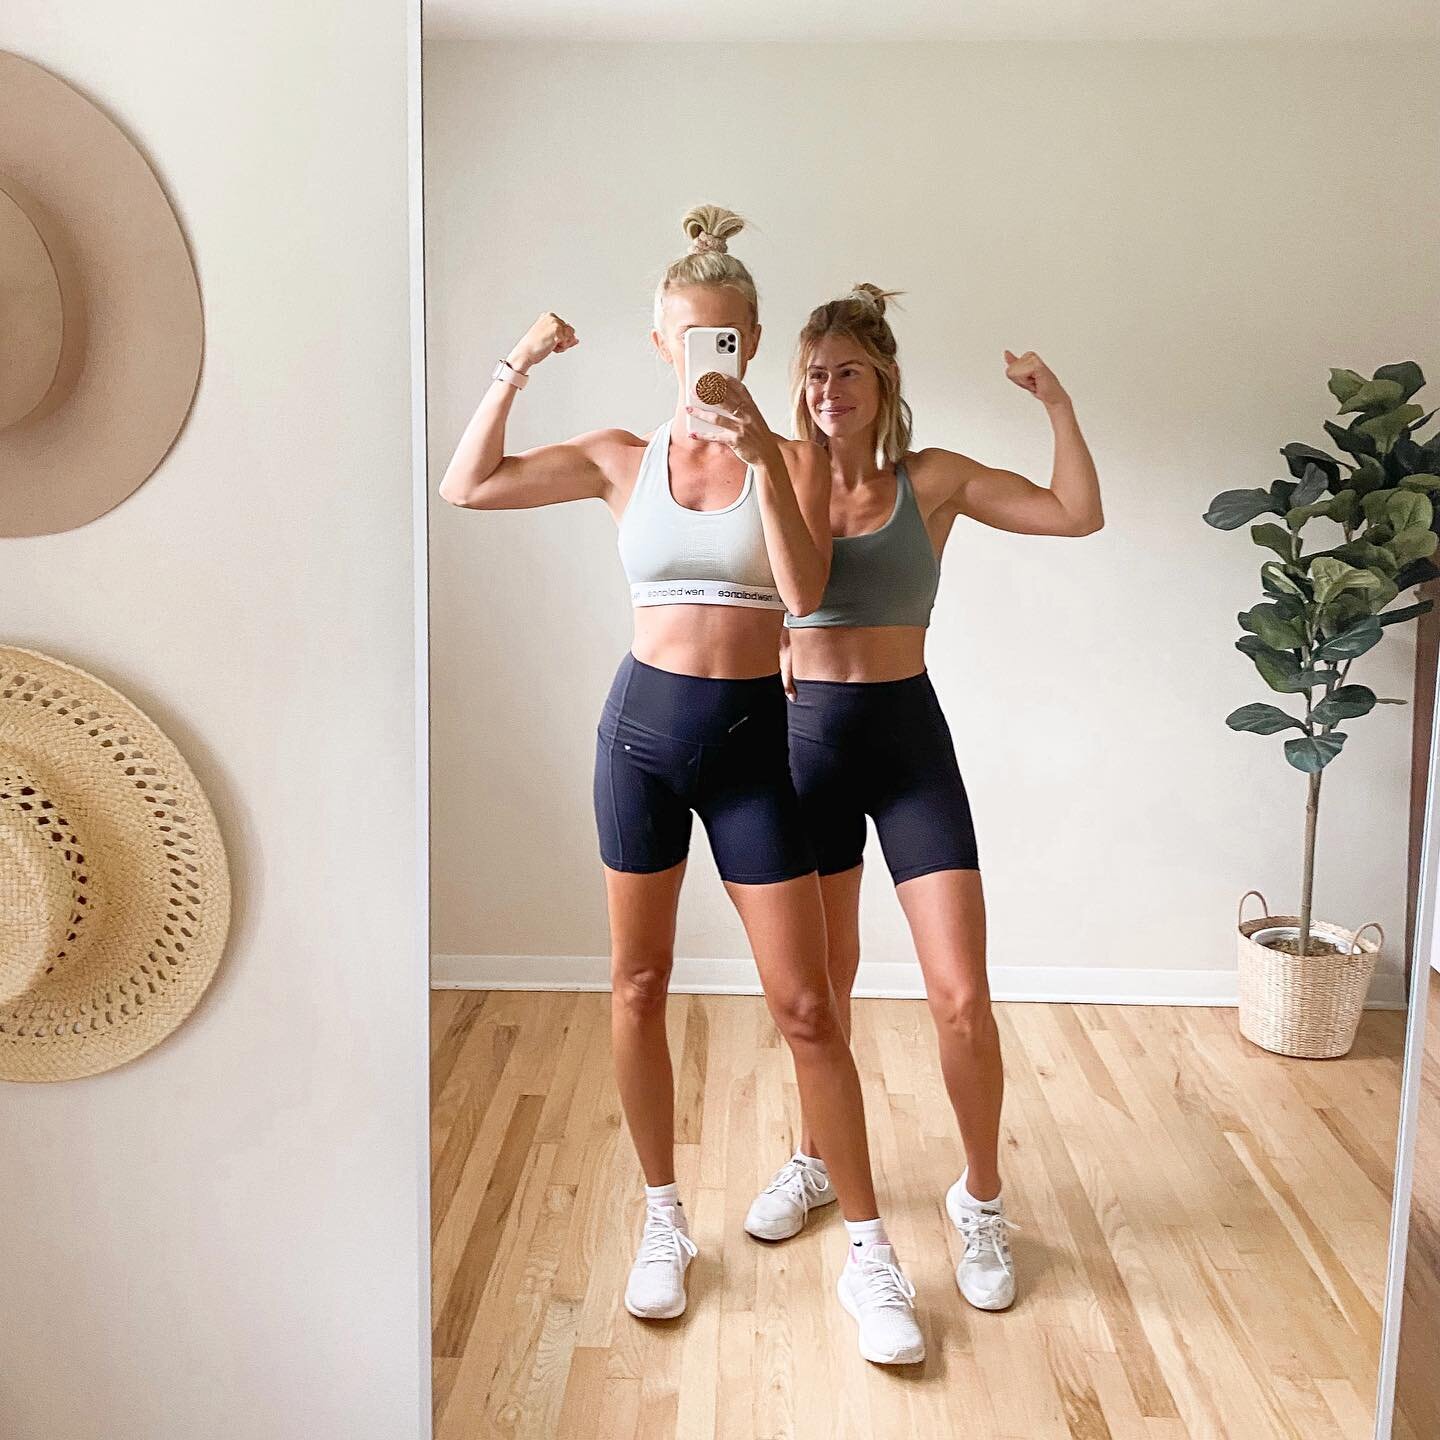 When you meet bad ass babes through IG, then all of a sudden they&rsquo;re at your house working out with you 😭💪🏼
 
Feeling super grateful today for all the incredible women I&rsquo;ve connected with over the years through this page 🤍  @samanthap